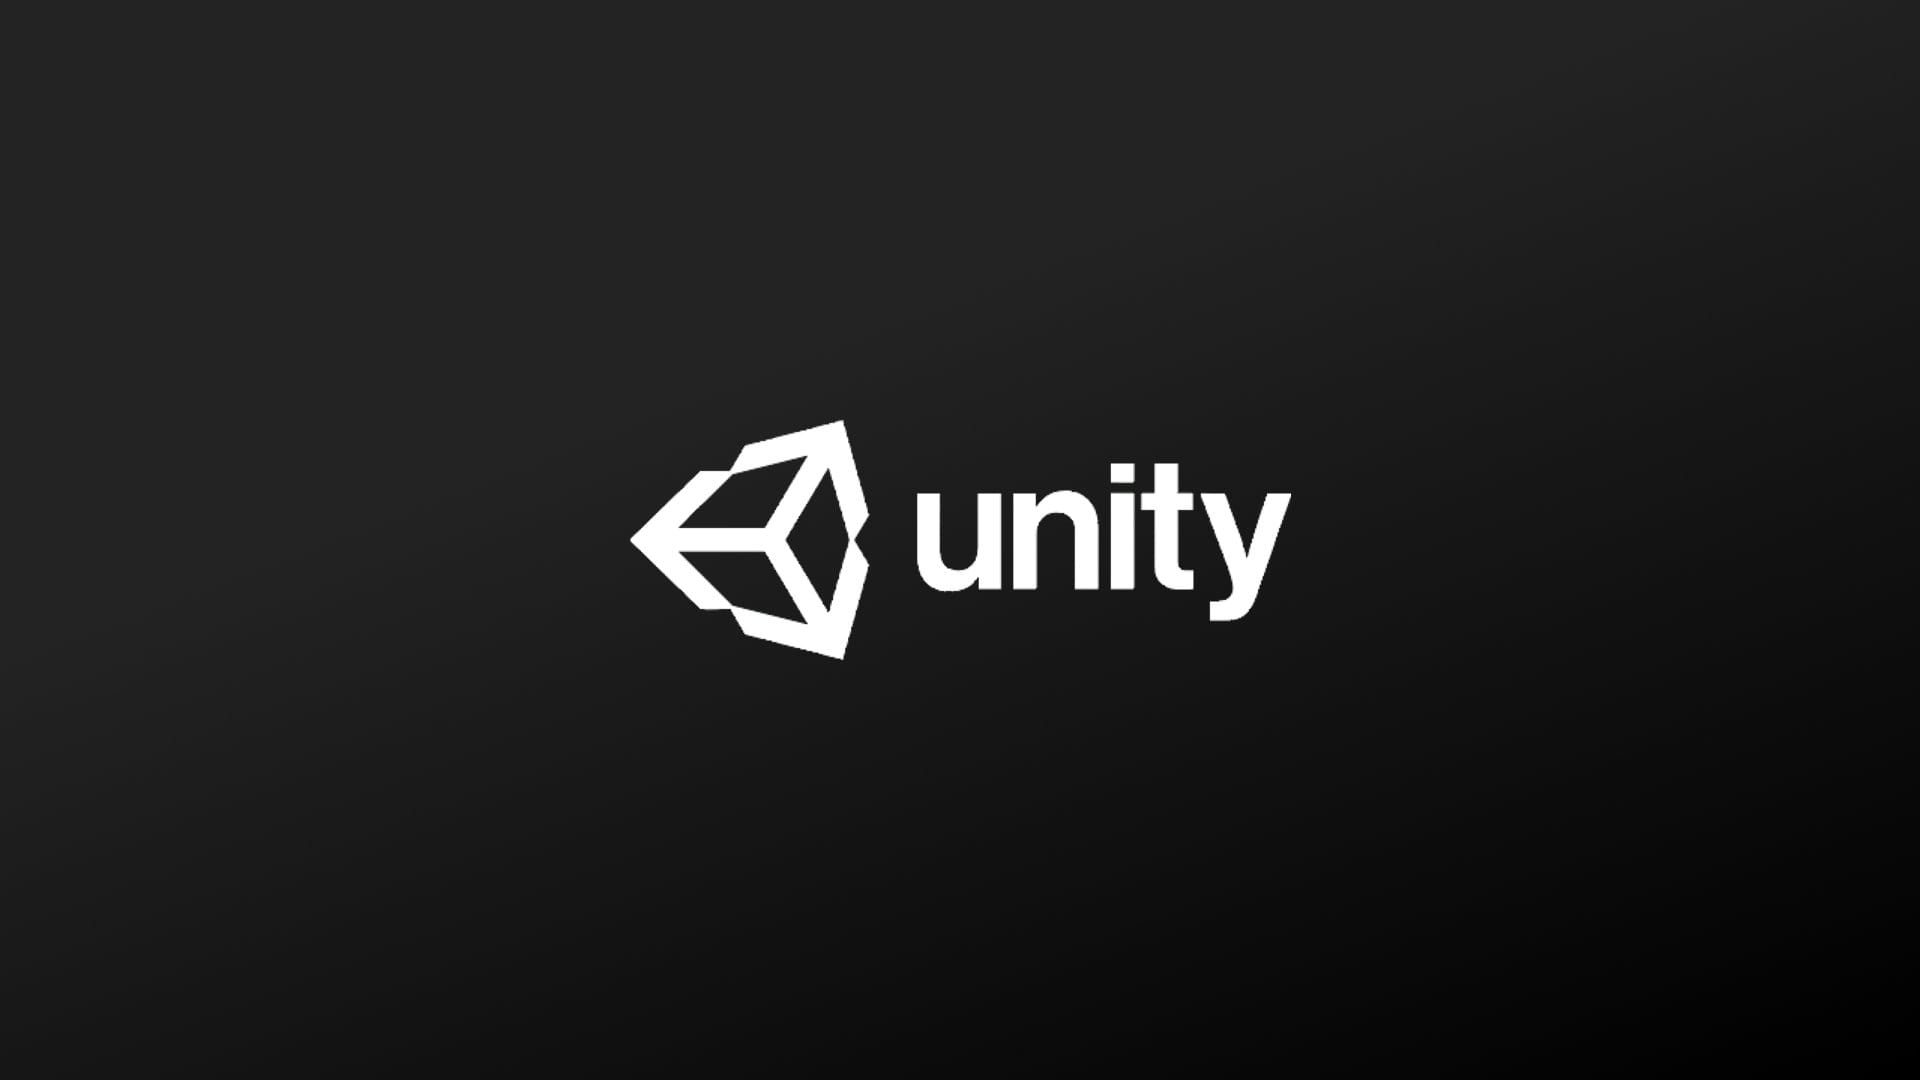 unity20ipo20cover-8906778